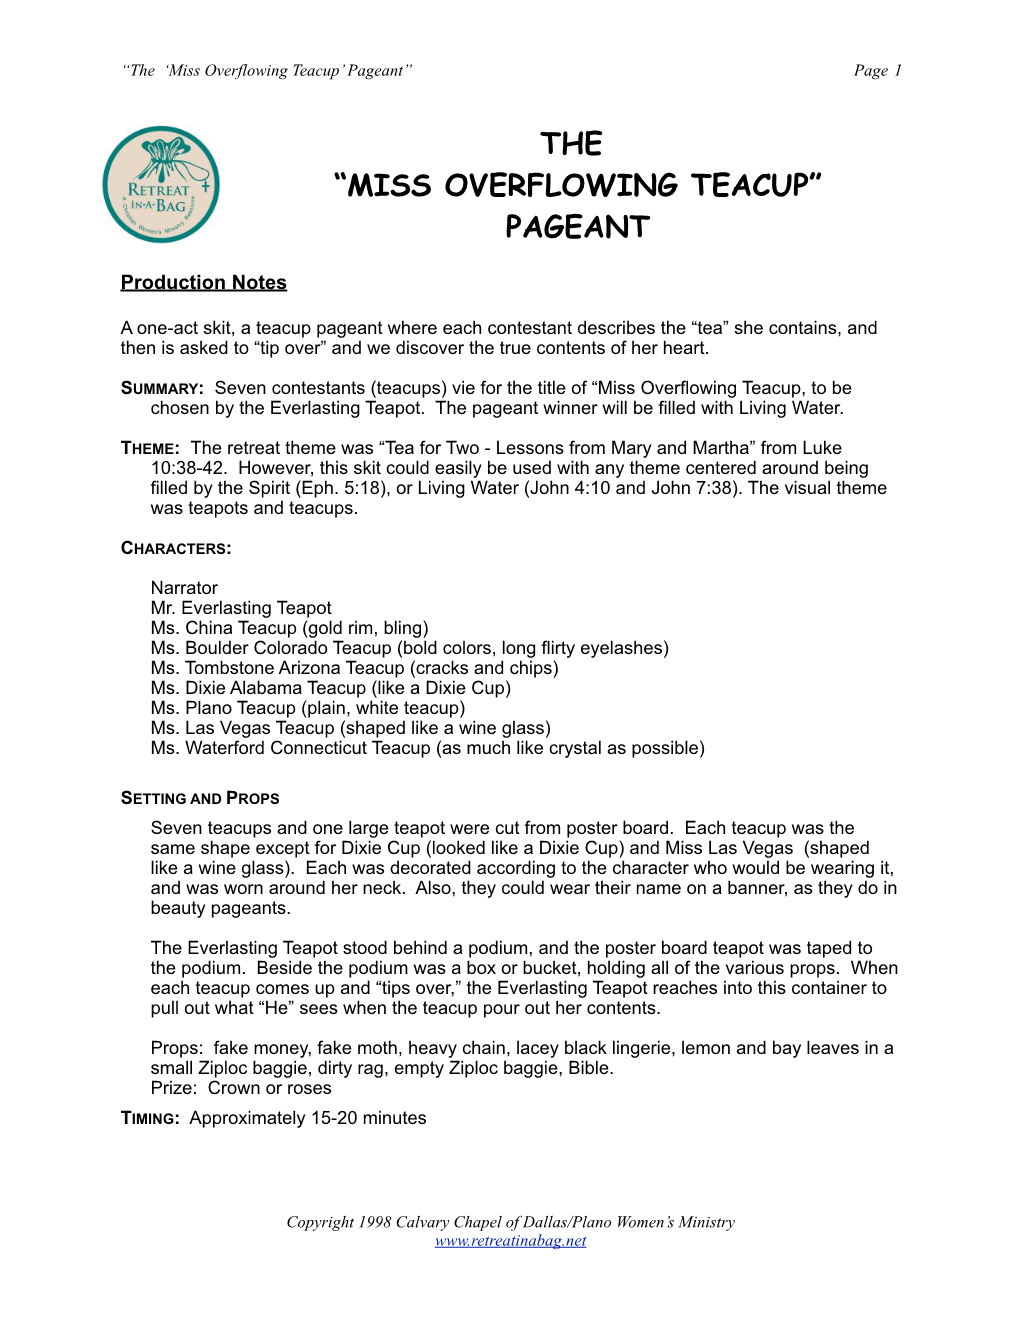 The “Miss Overflowing Teacup” Pageant